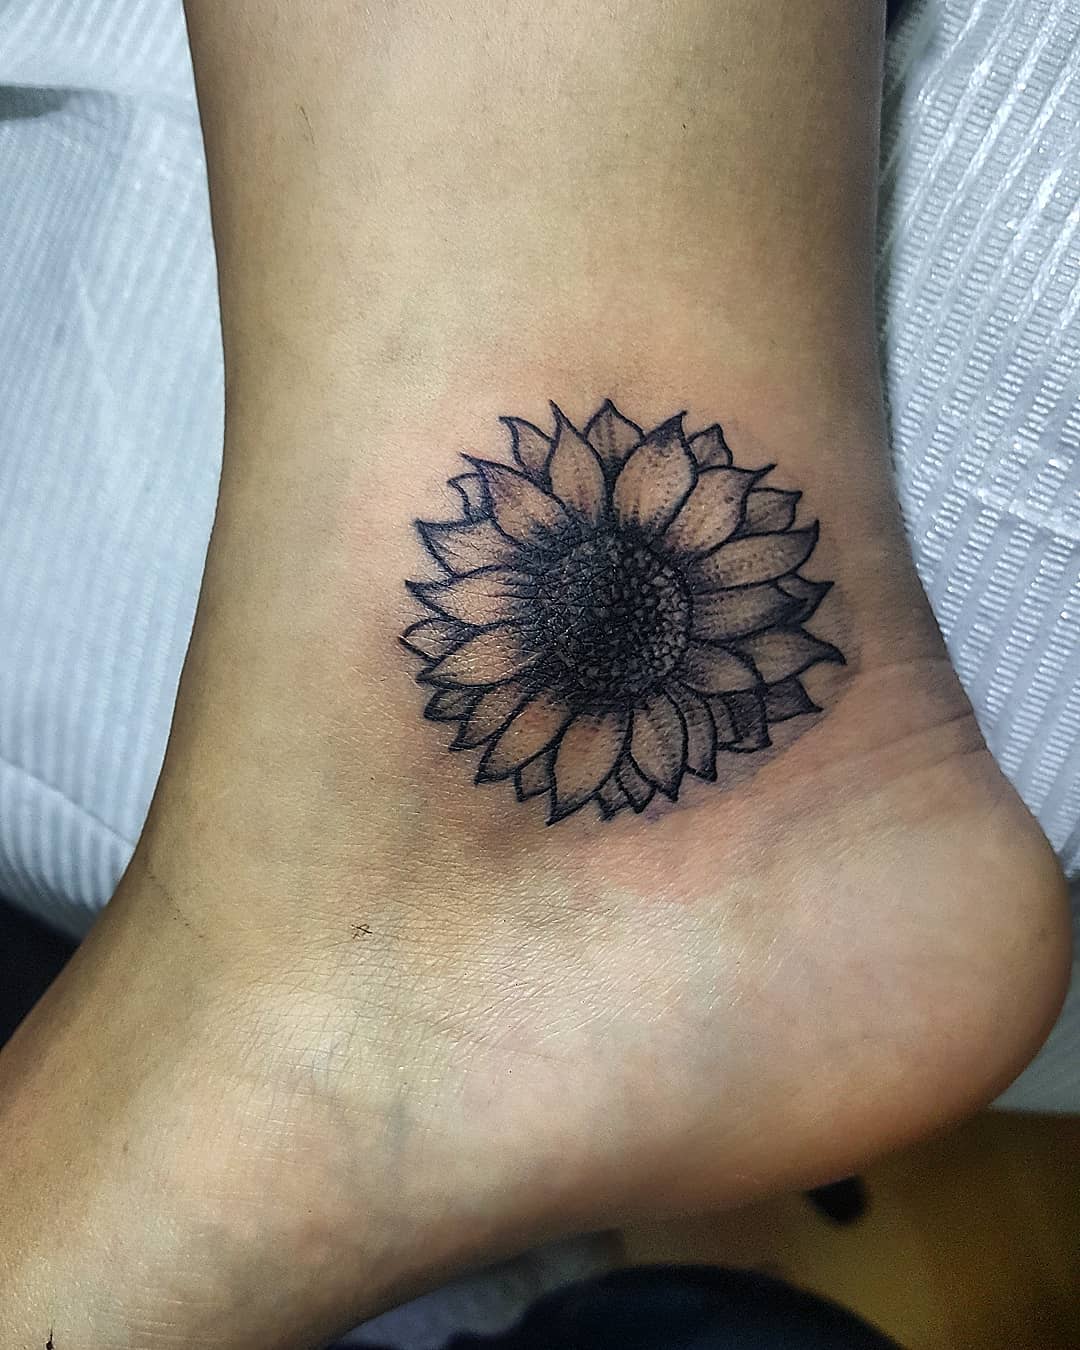 The Small Drawing On Ankle